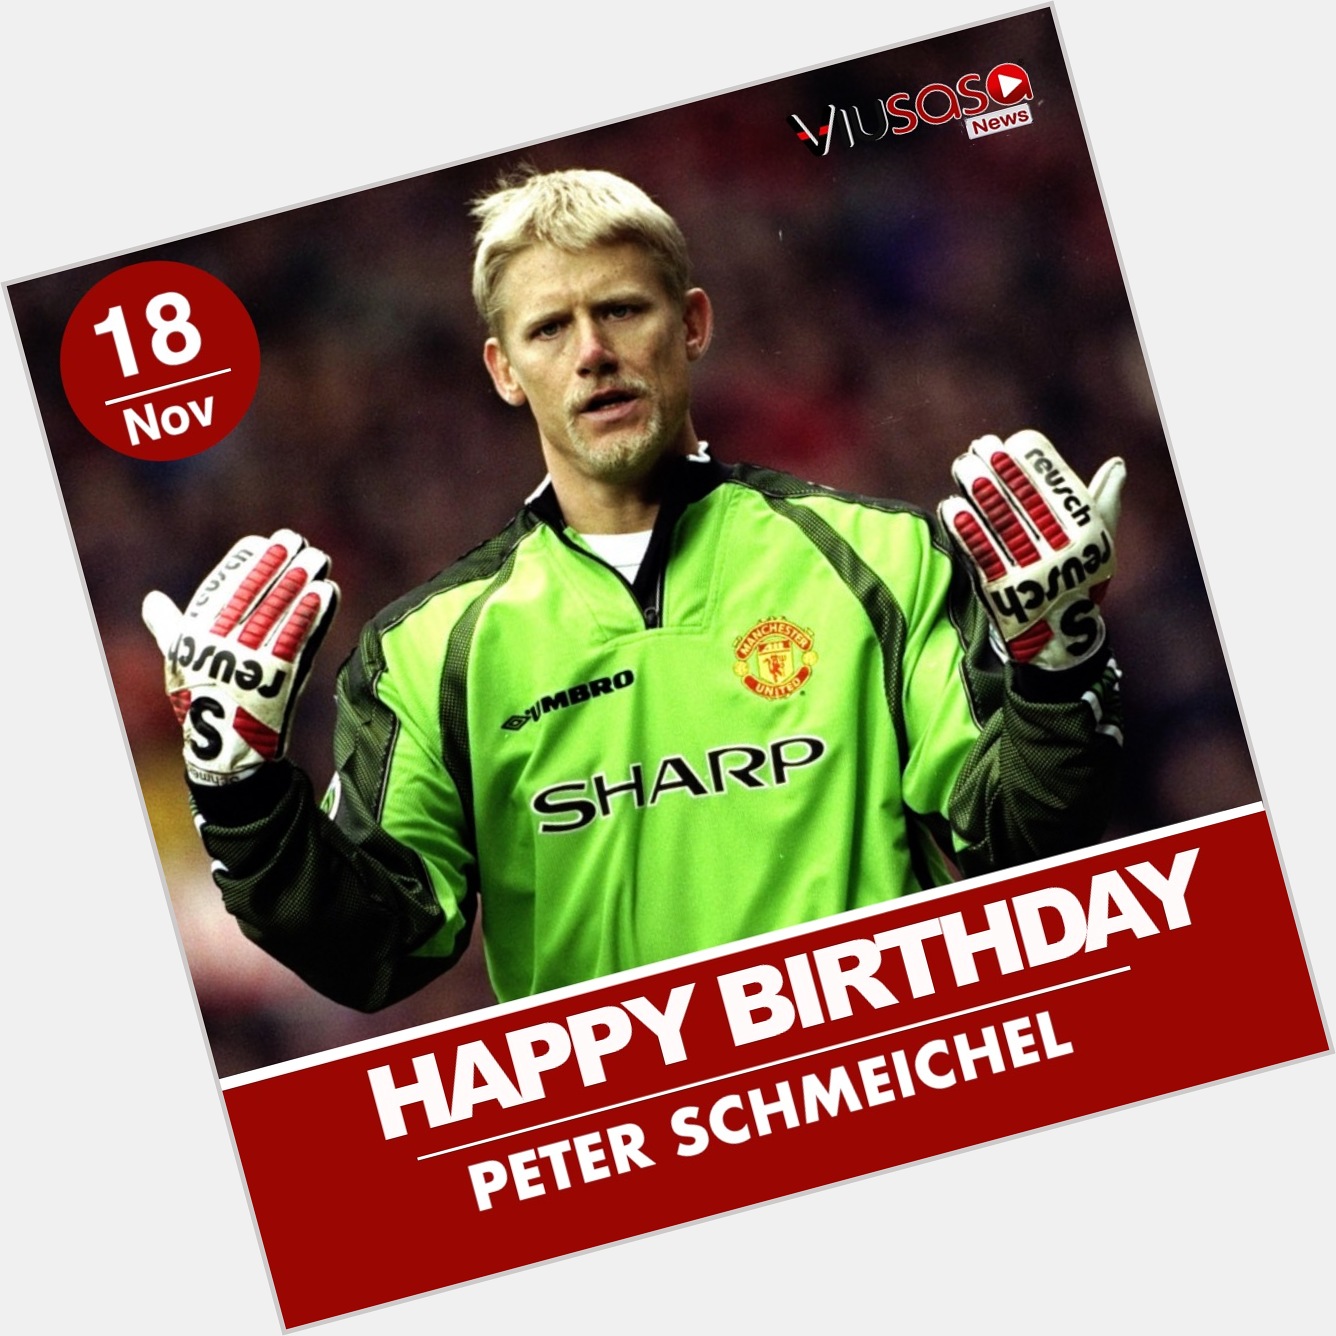 Happy birthday to Peter Schmeichel, who turns 57 today 